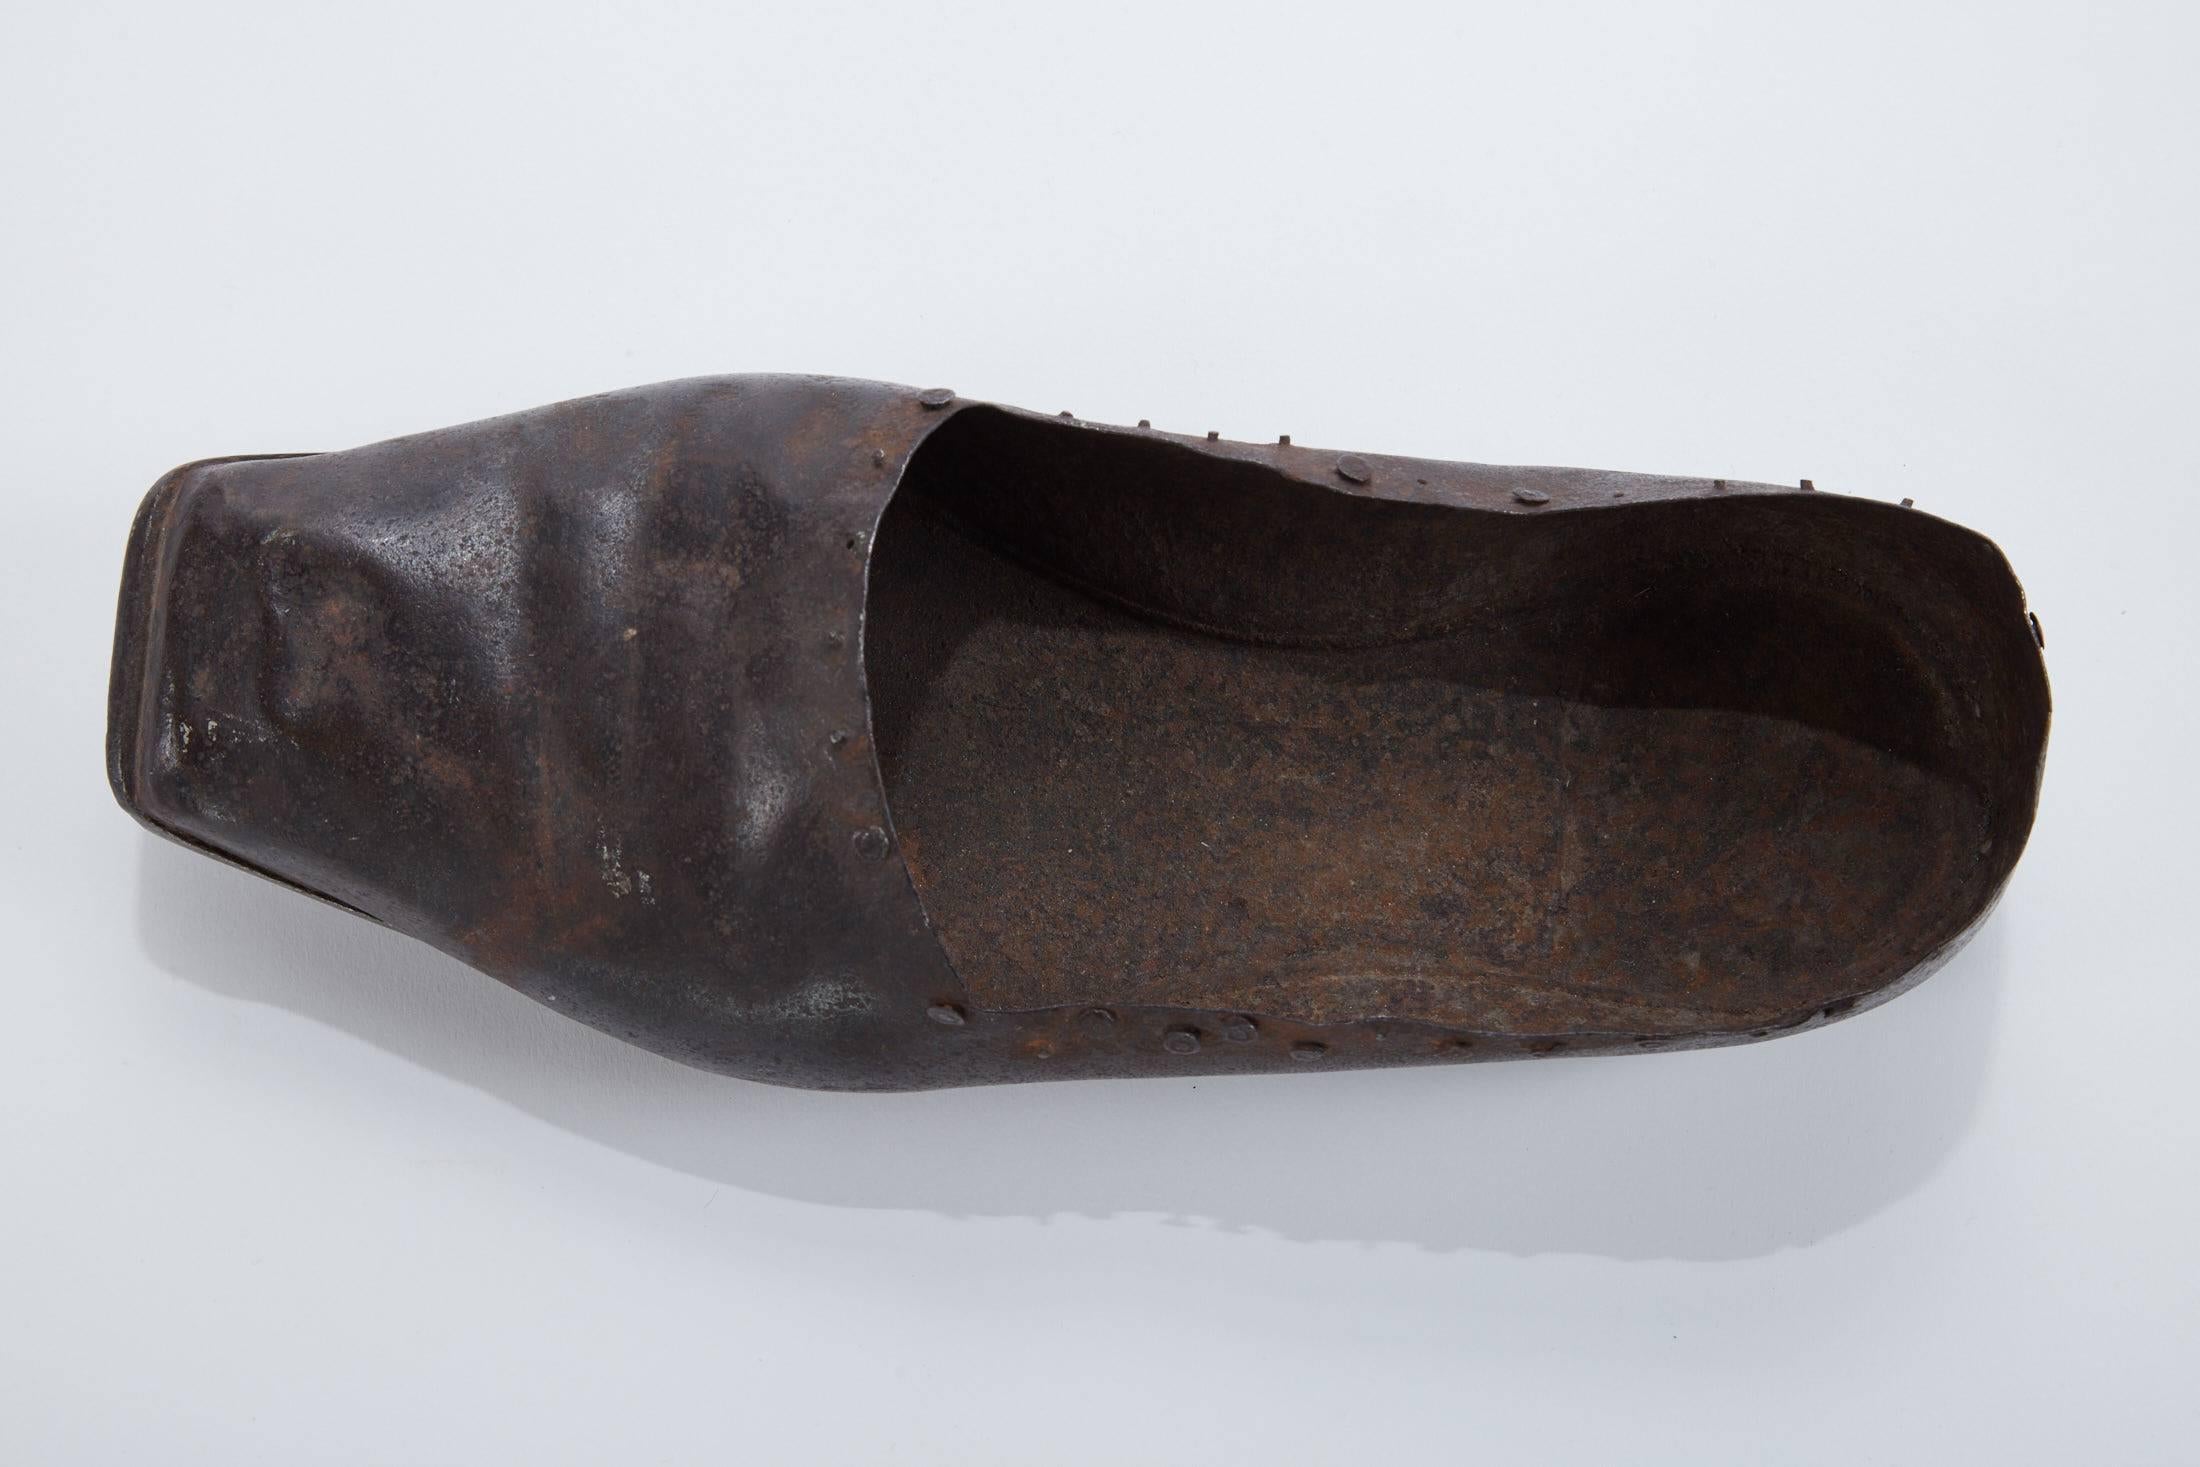 Late 19th century hand-forged iron shoe, likely a Conblers sample.
   